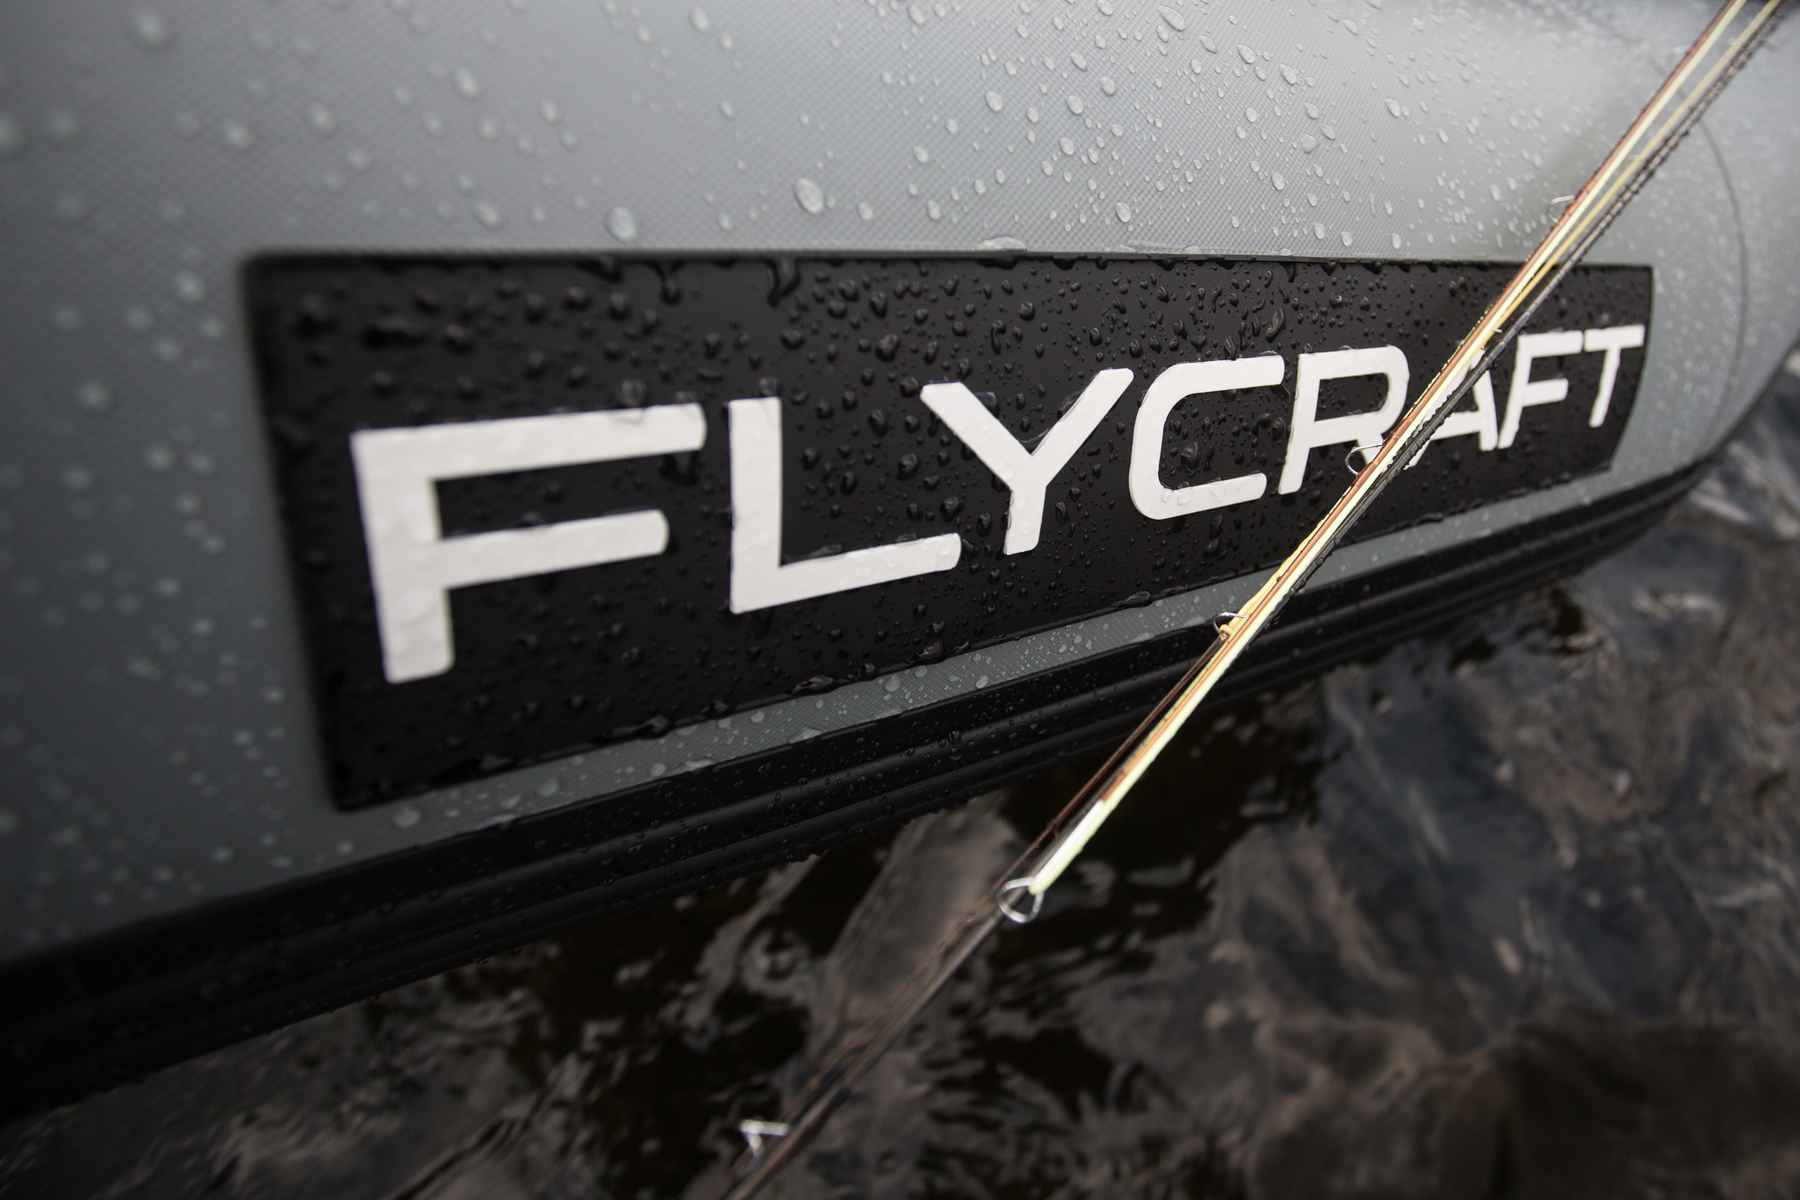 Review: Flycraft Stealth fishing craft